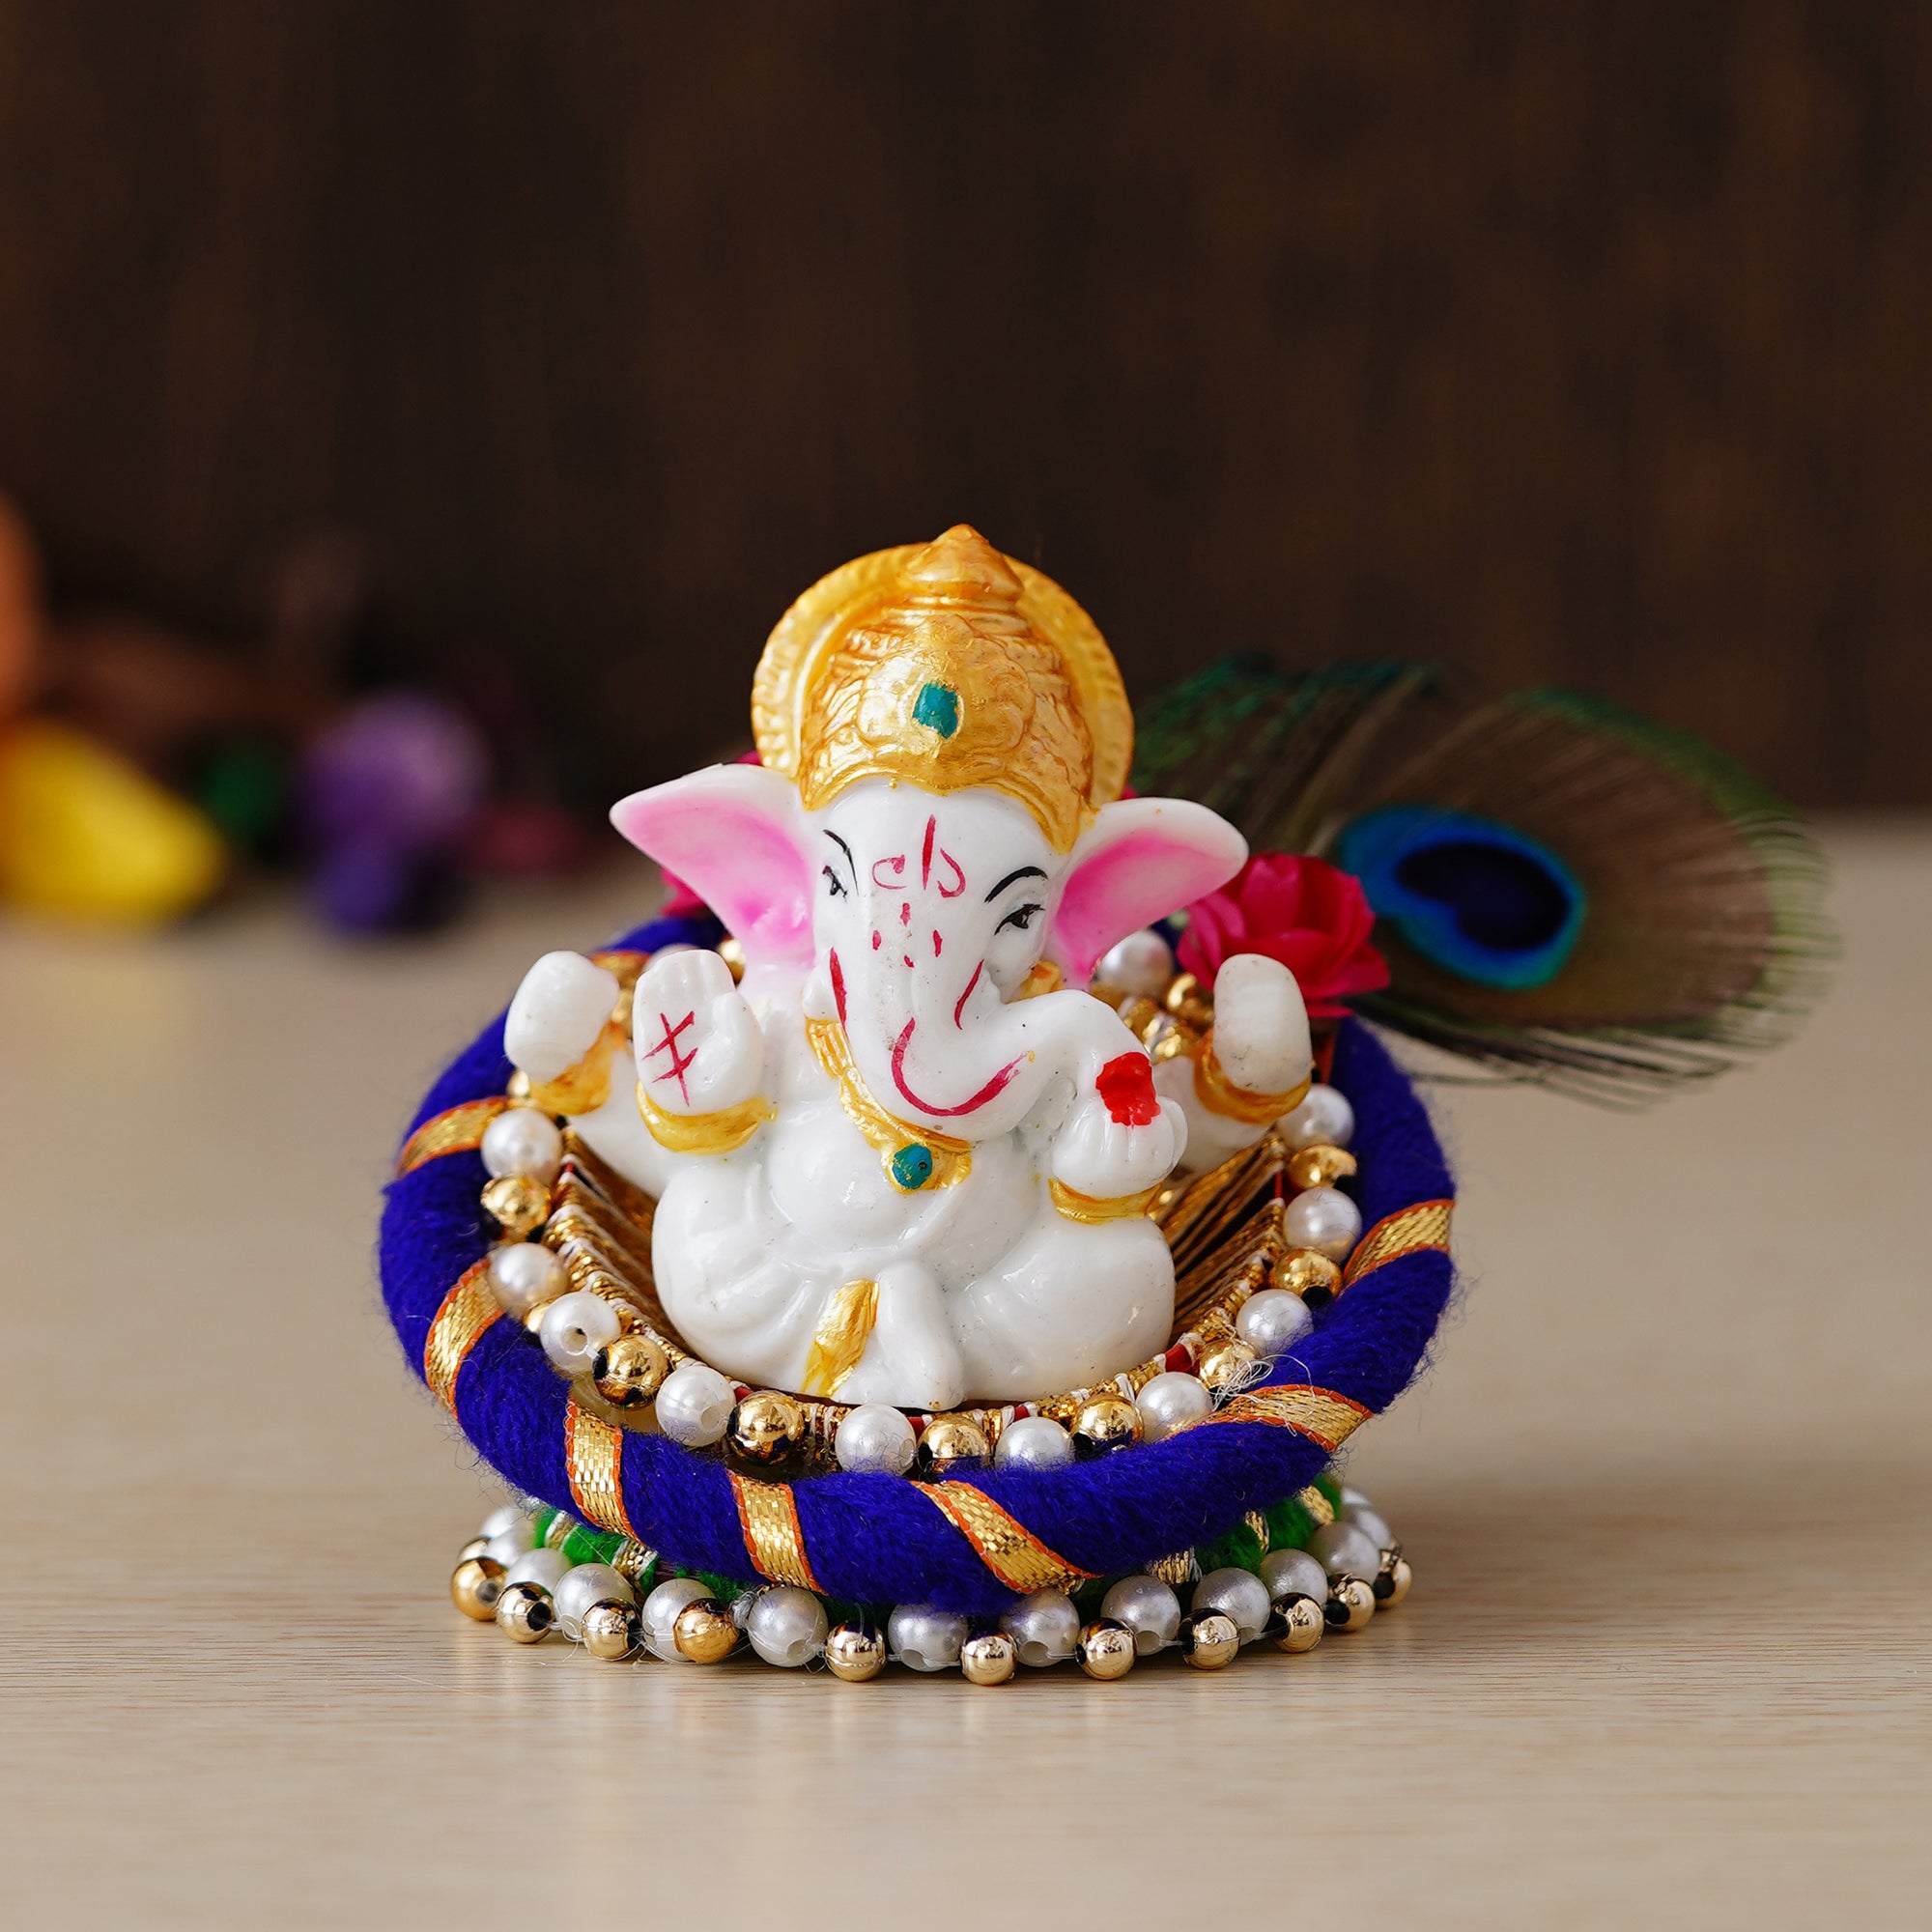 Polyresin Lord Ganesha Idol on Decorative Handcrafted Floral Plate for Home, Office and Car Dashboard